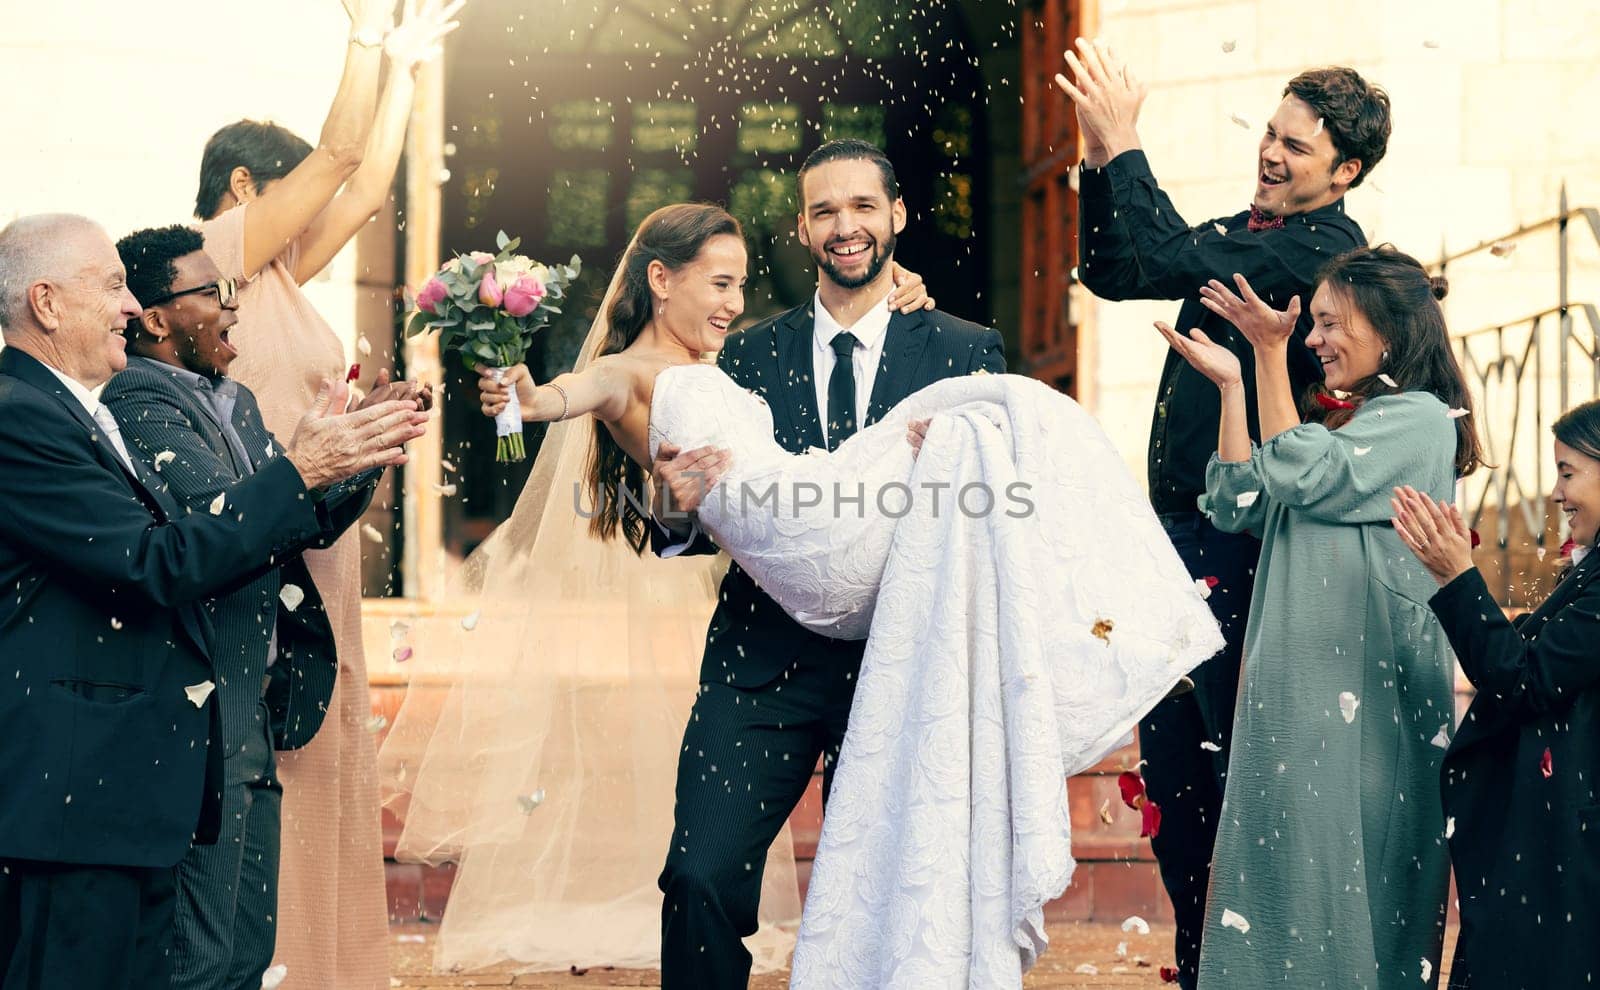 Wedding, love and man carrying woman outside church fo celebration of loving vows. Commitment and romance, romantic marriage, fun and man holding woman after love ceremony for bride and groom.